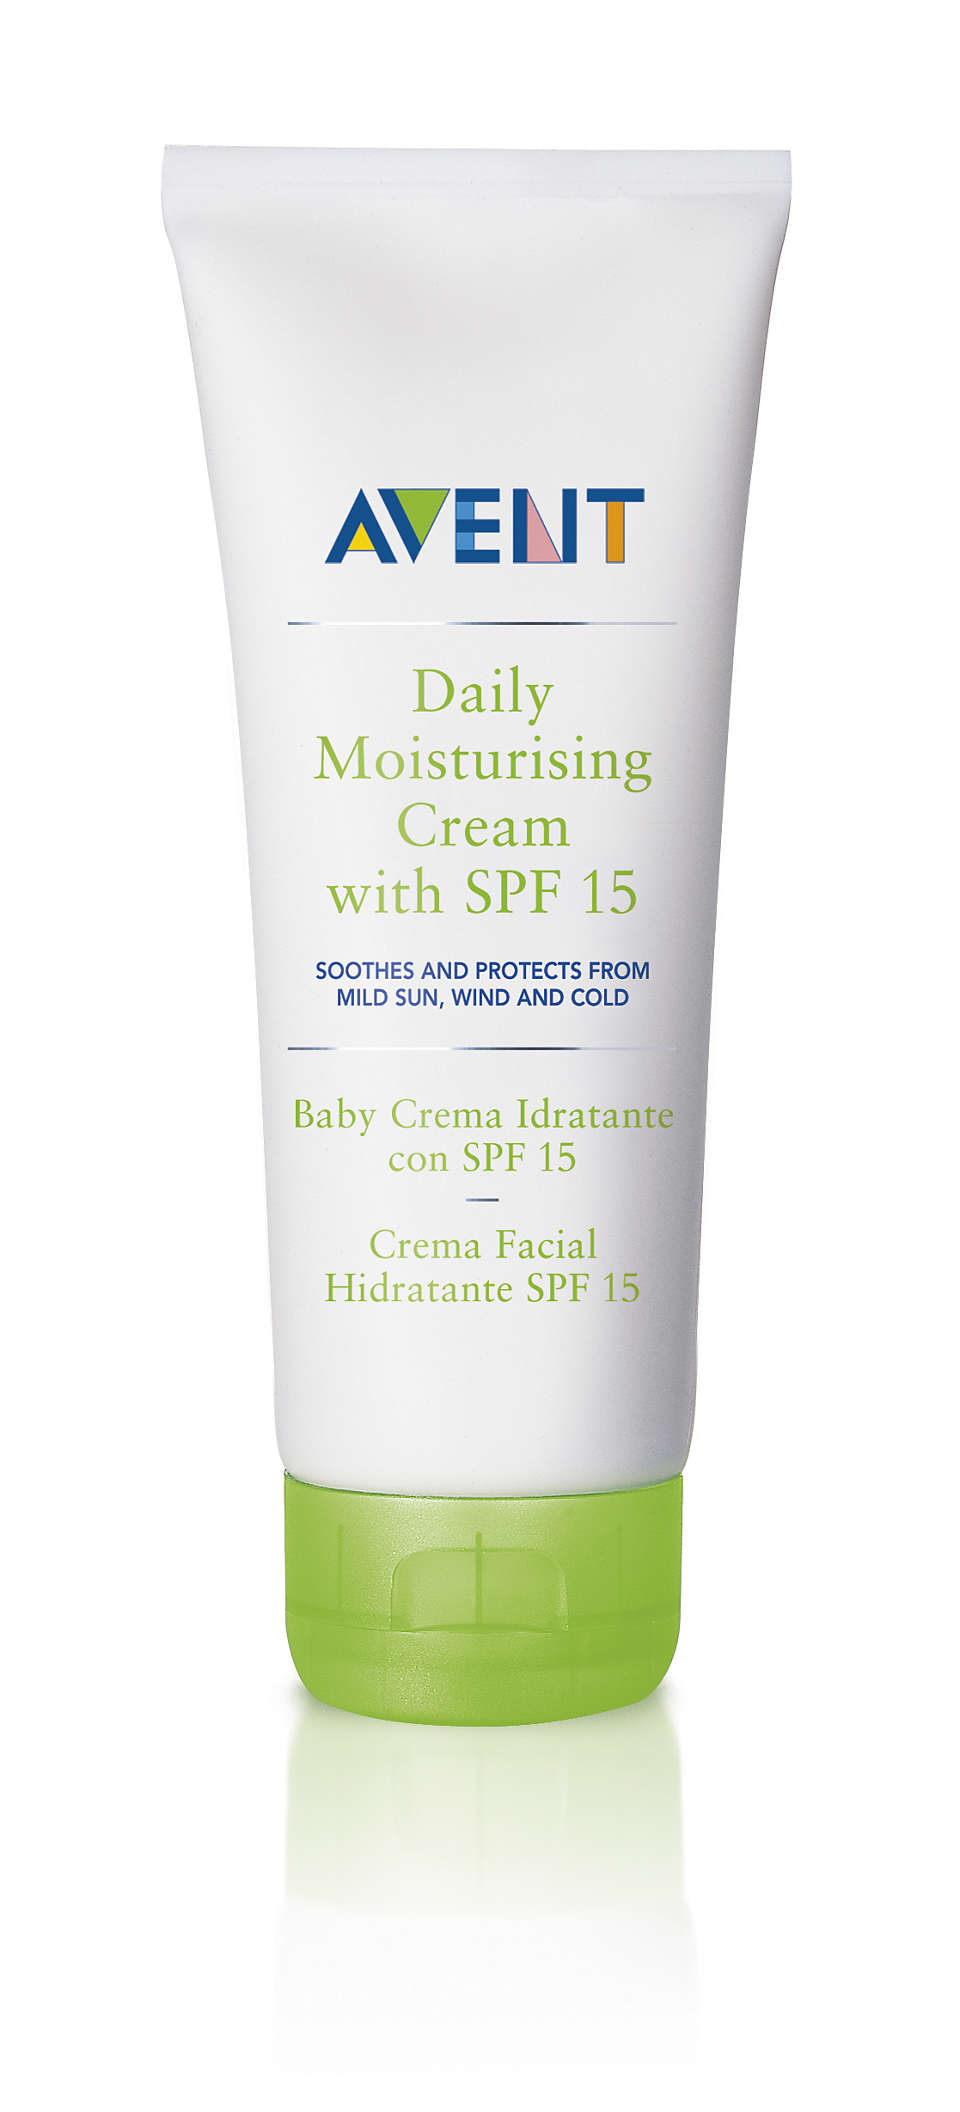 Soothes and protects from mild sun, wind and cold